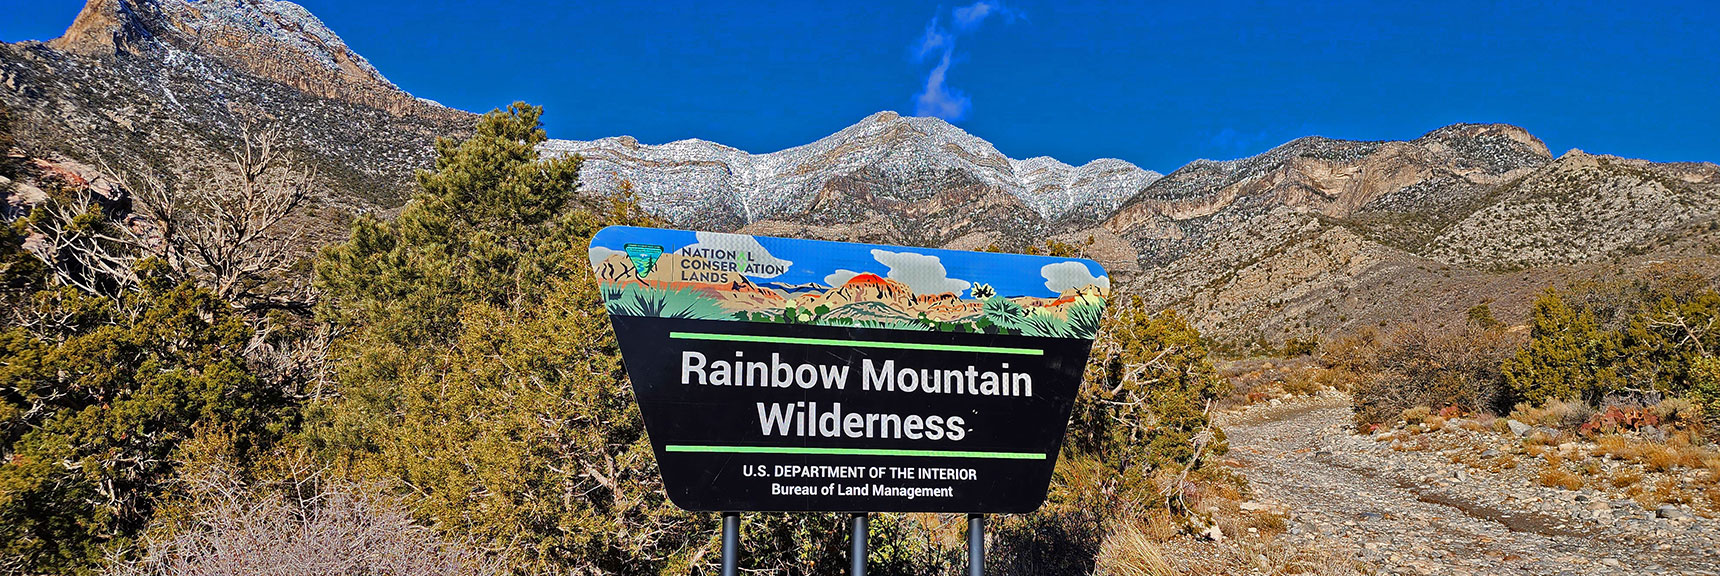 Rainbow Mountain Wilderness Entrance Sign Just Across Rocky Gap Road | White Rock Mountain Loop Trail | Red Rock Canyon, Nevada